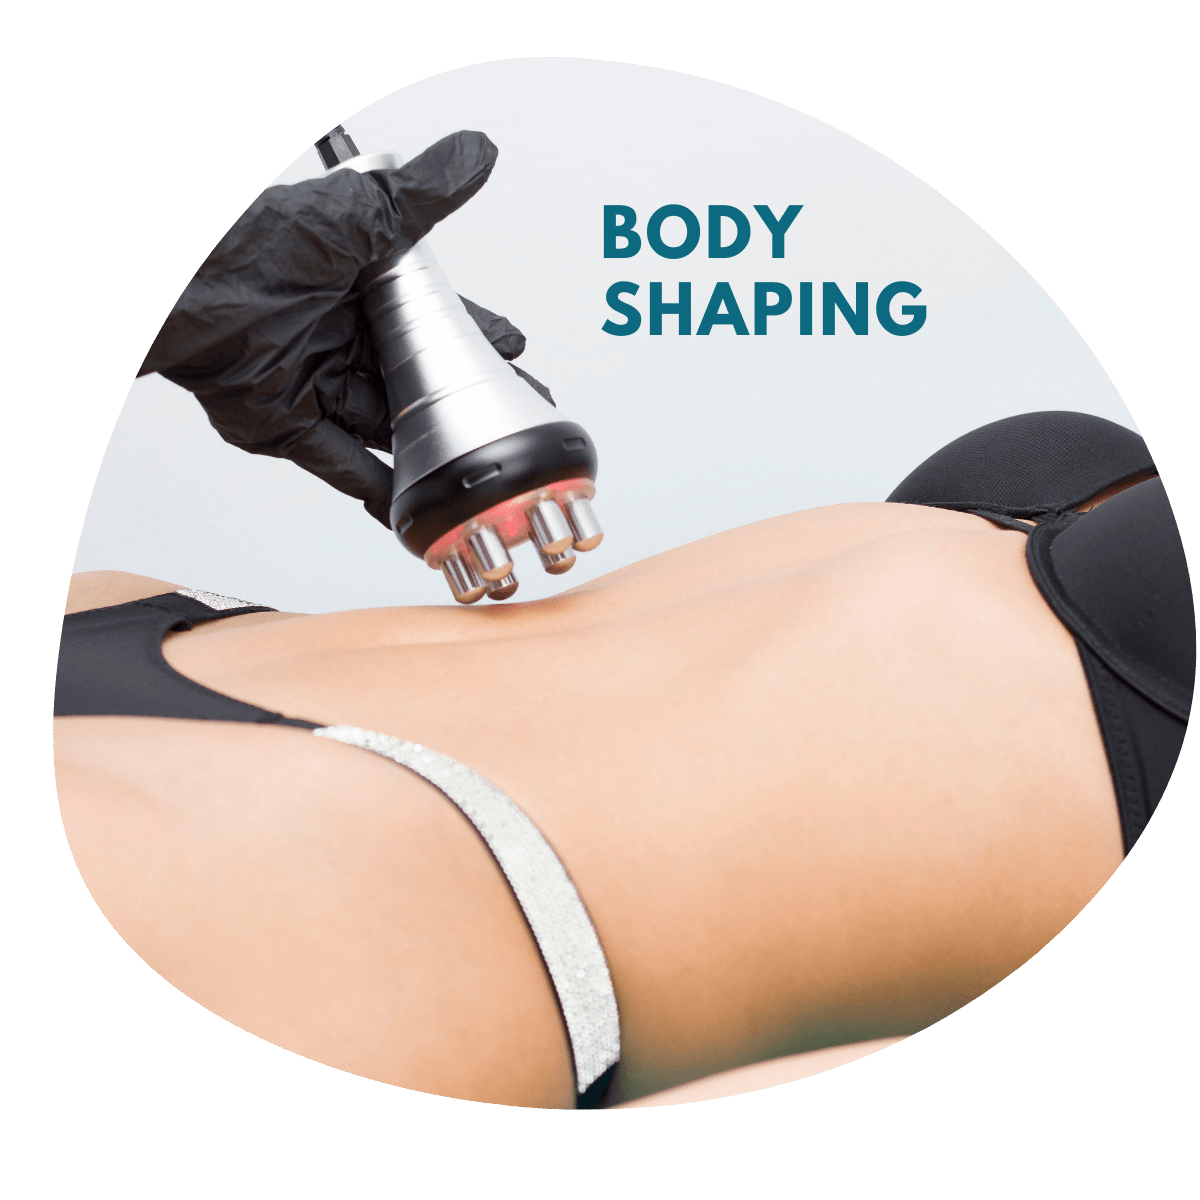 Ultrasonic Cavitation - Learn What It Is, How It Works, How to Save